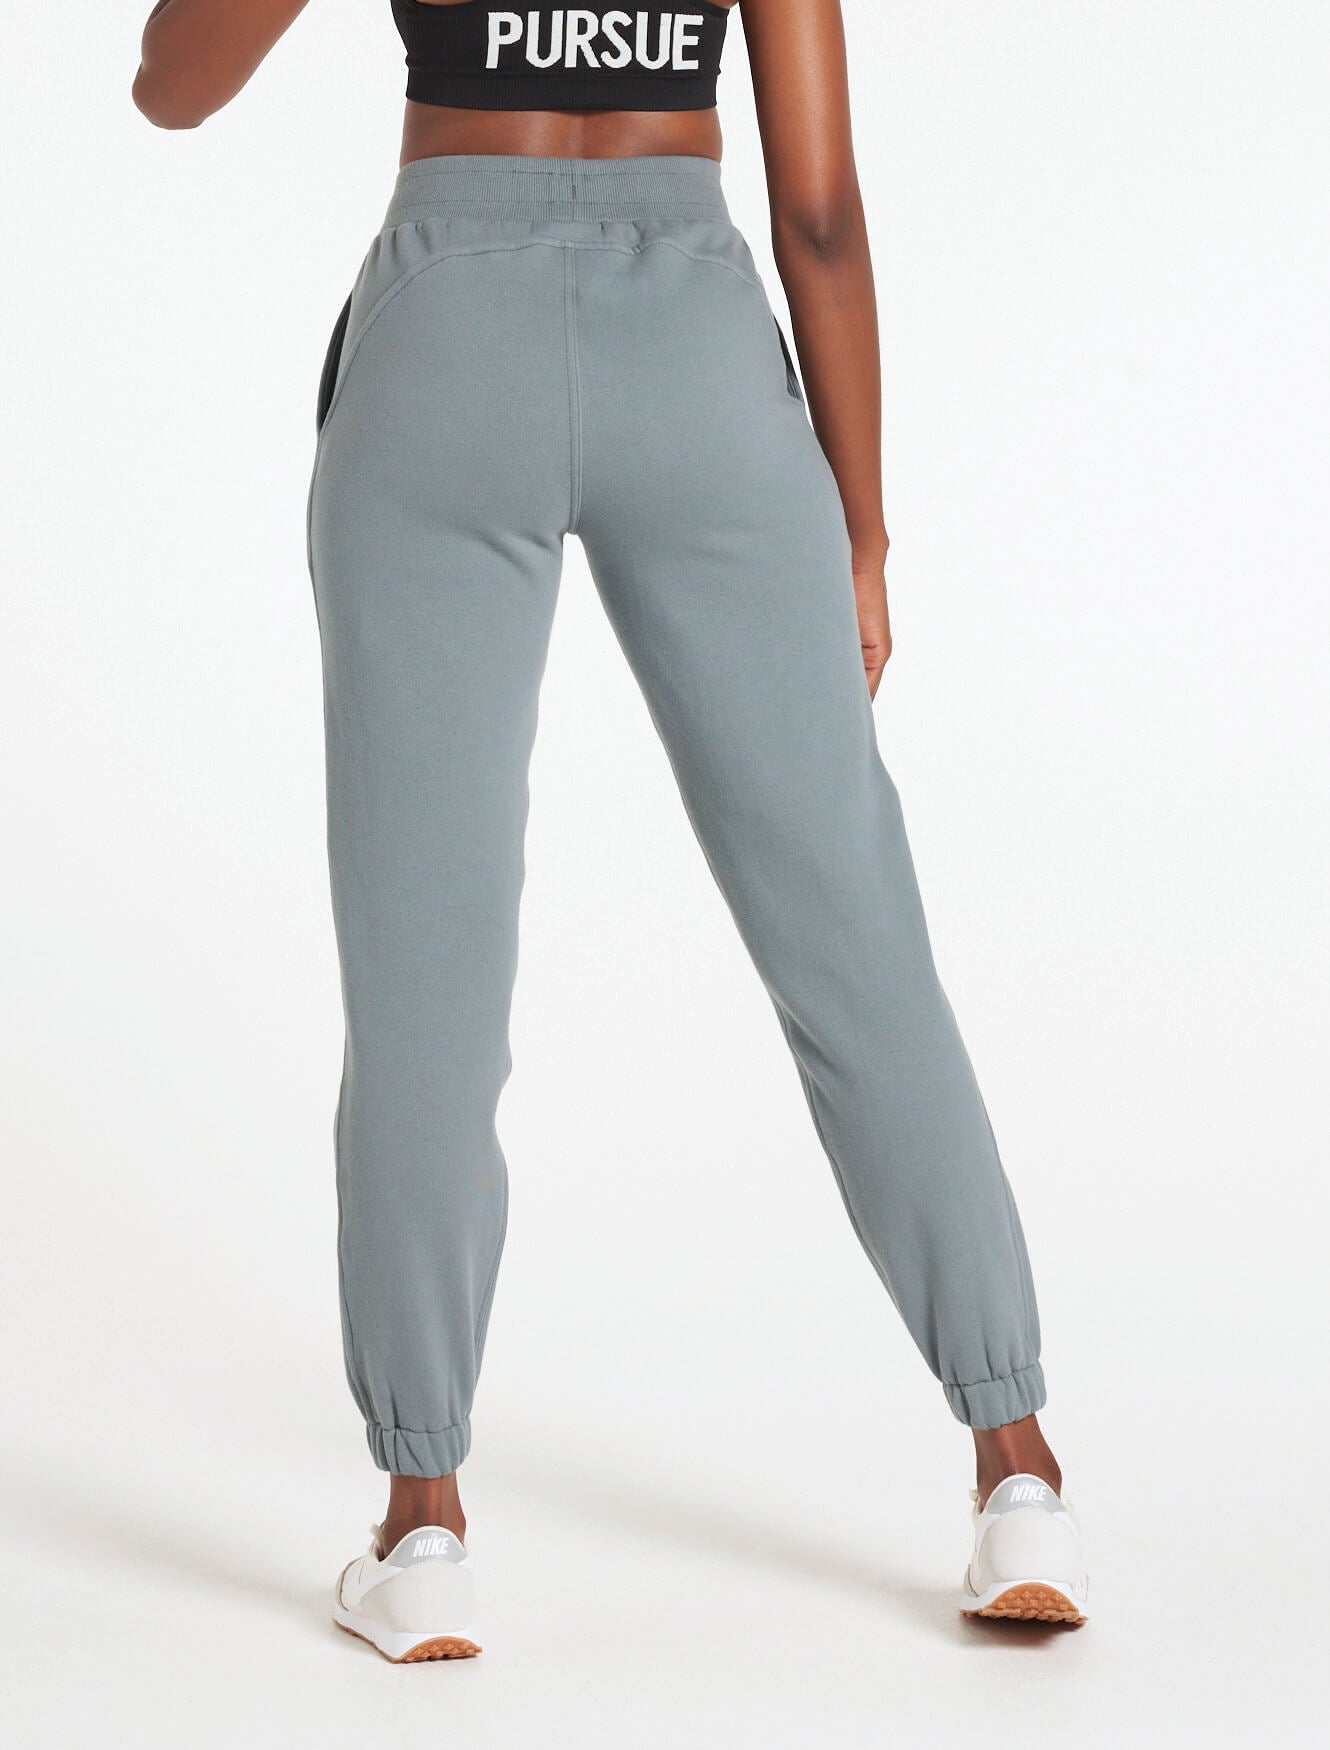 Select Bottoms / Teal Pursue Fitness 2